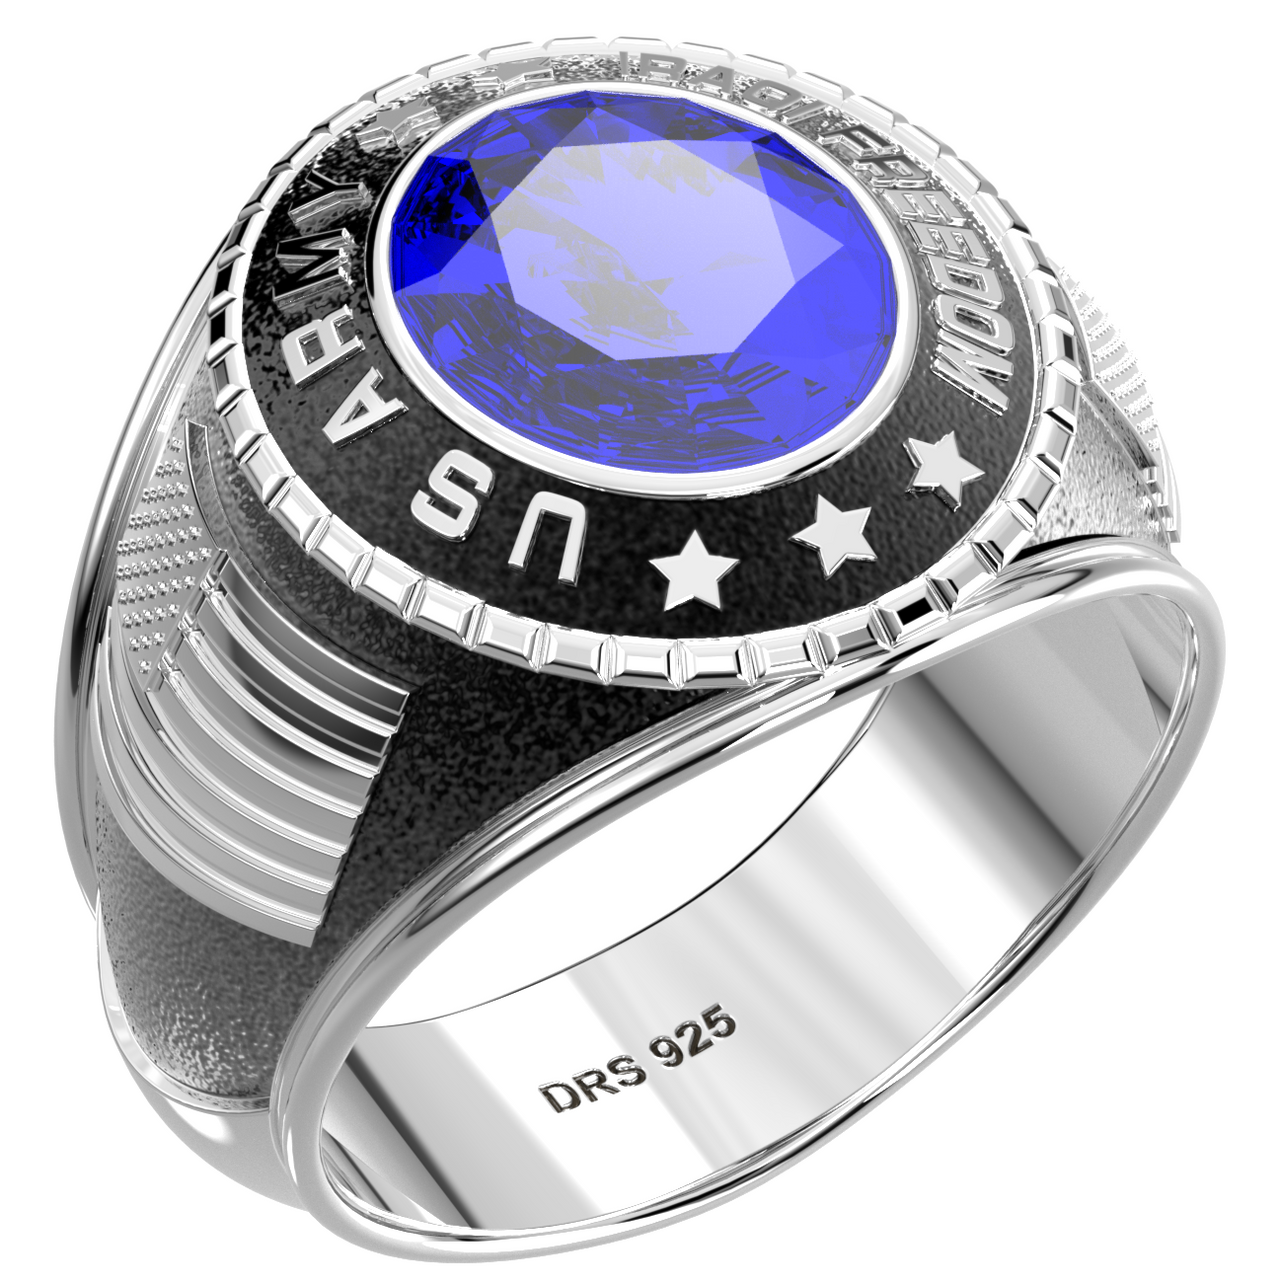 Customizable Iraqi Freedom Men's 925 Sterling Silver US Army Military Solid Back Ring